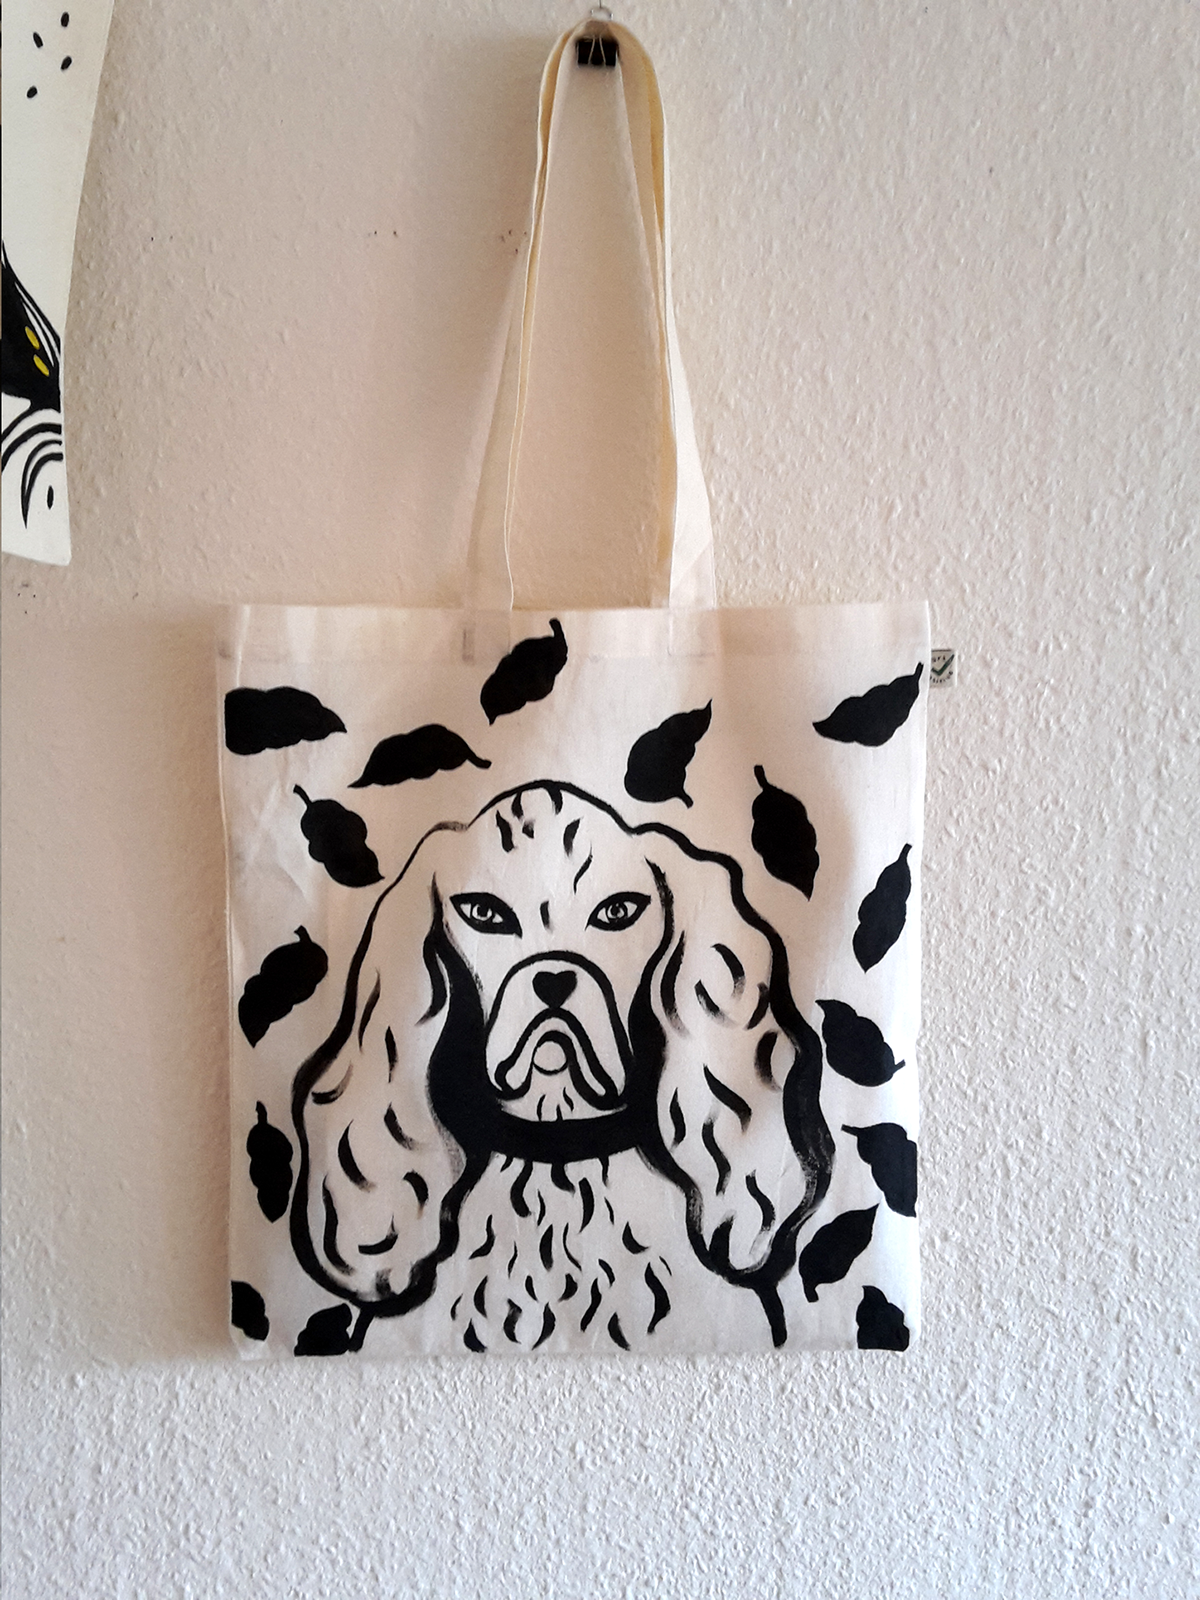 Hand painted bags on Behance